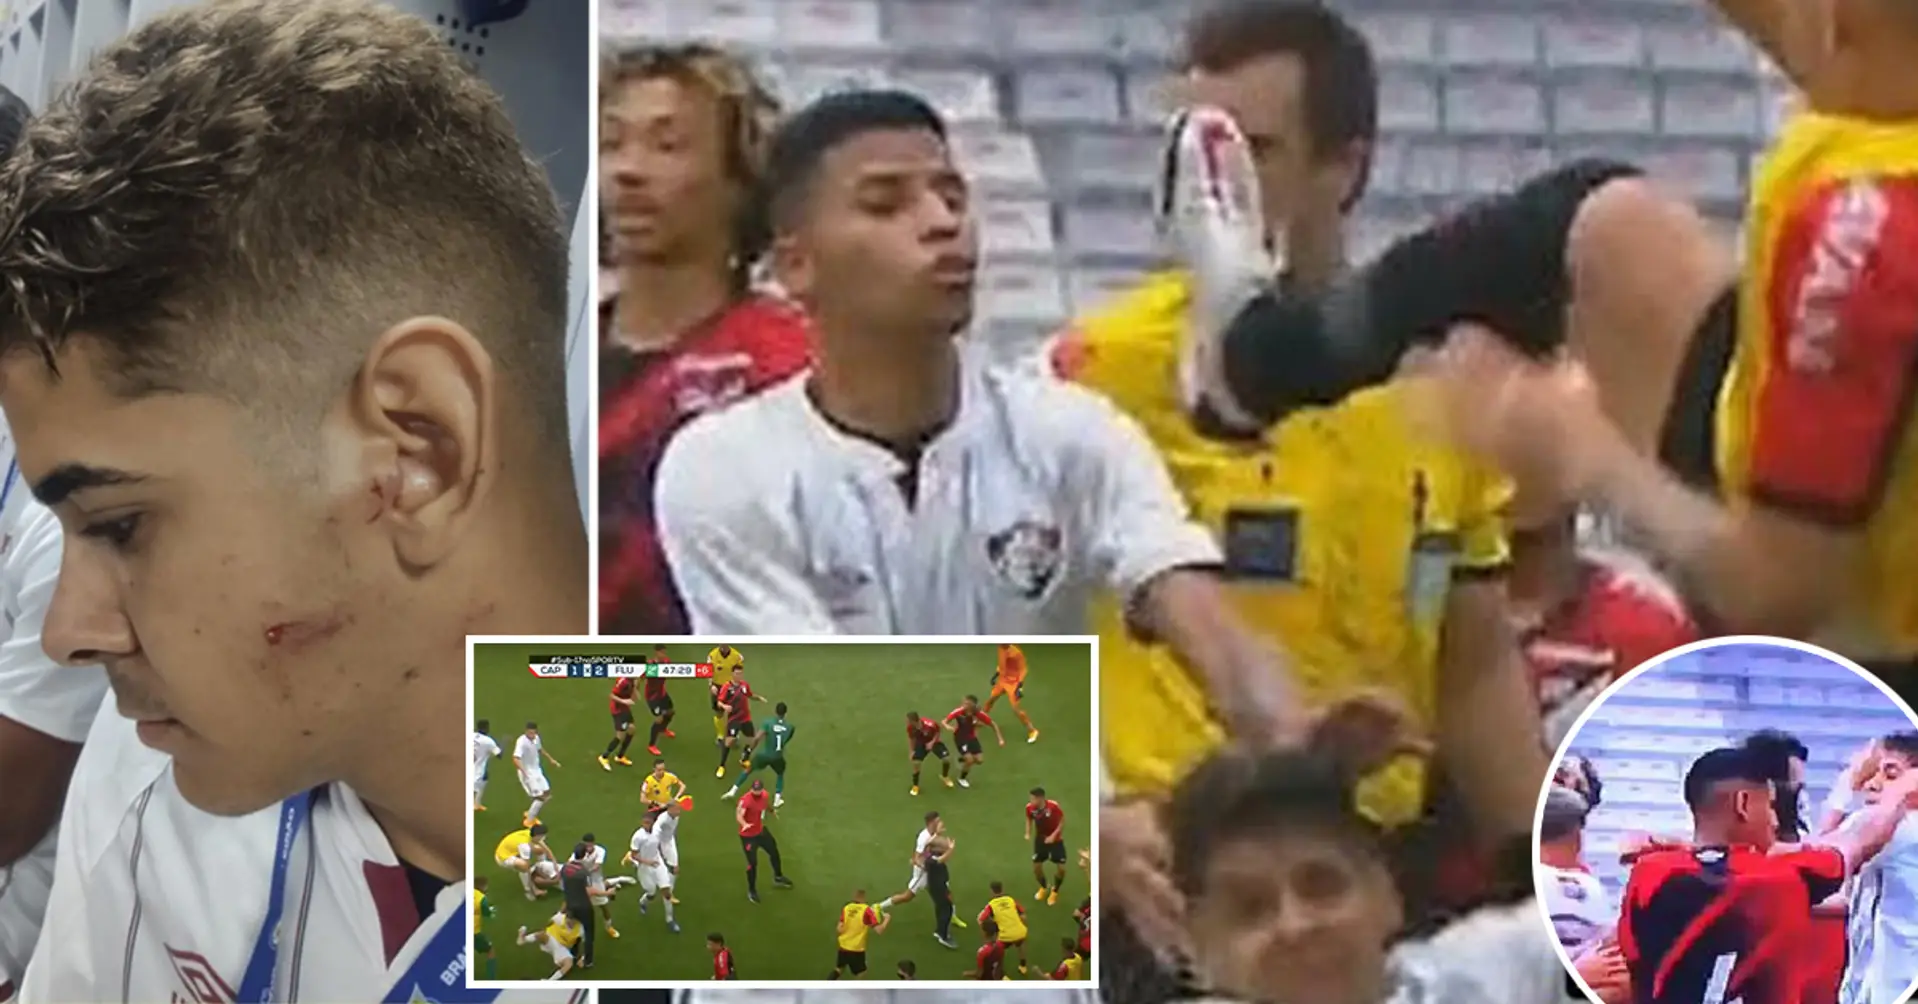 Brazilian player launches a brutal kung fu kick to opponent's face during final